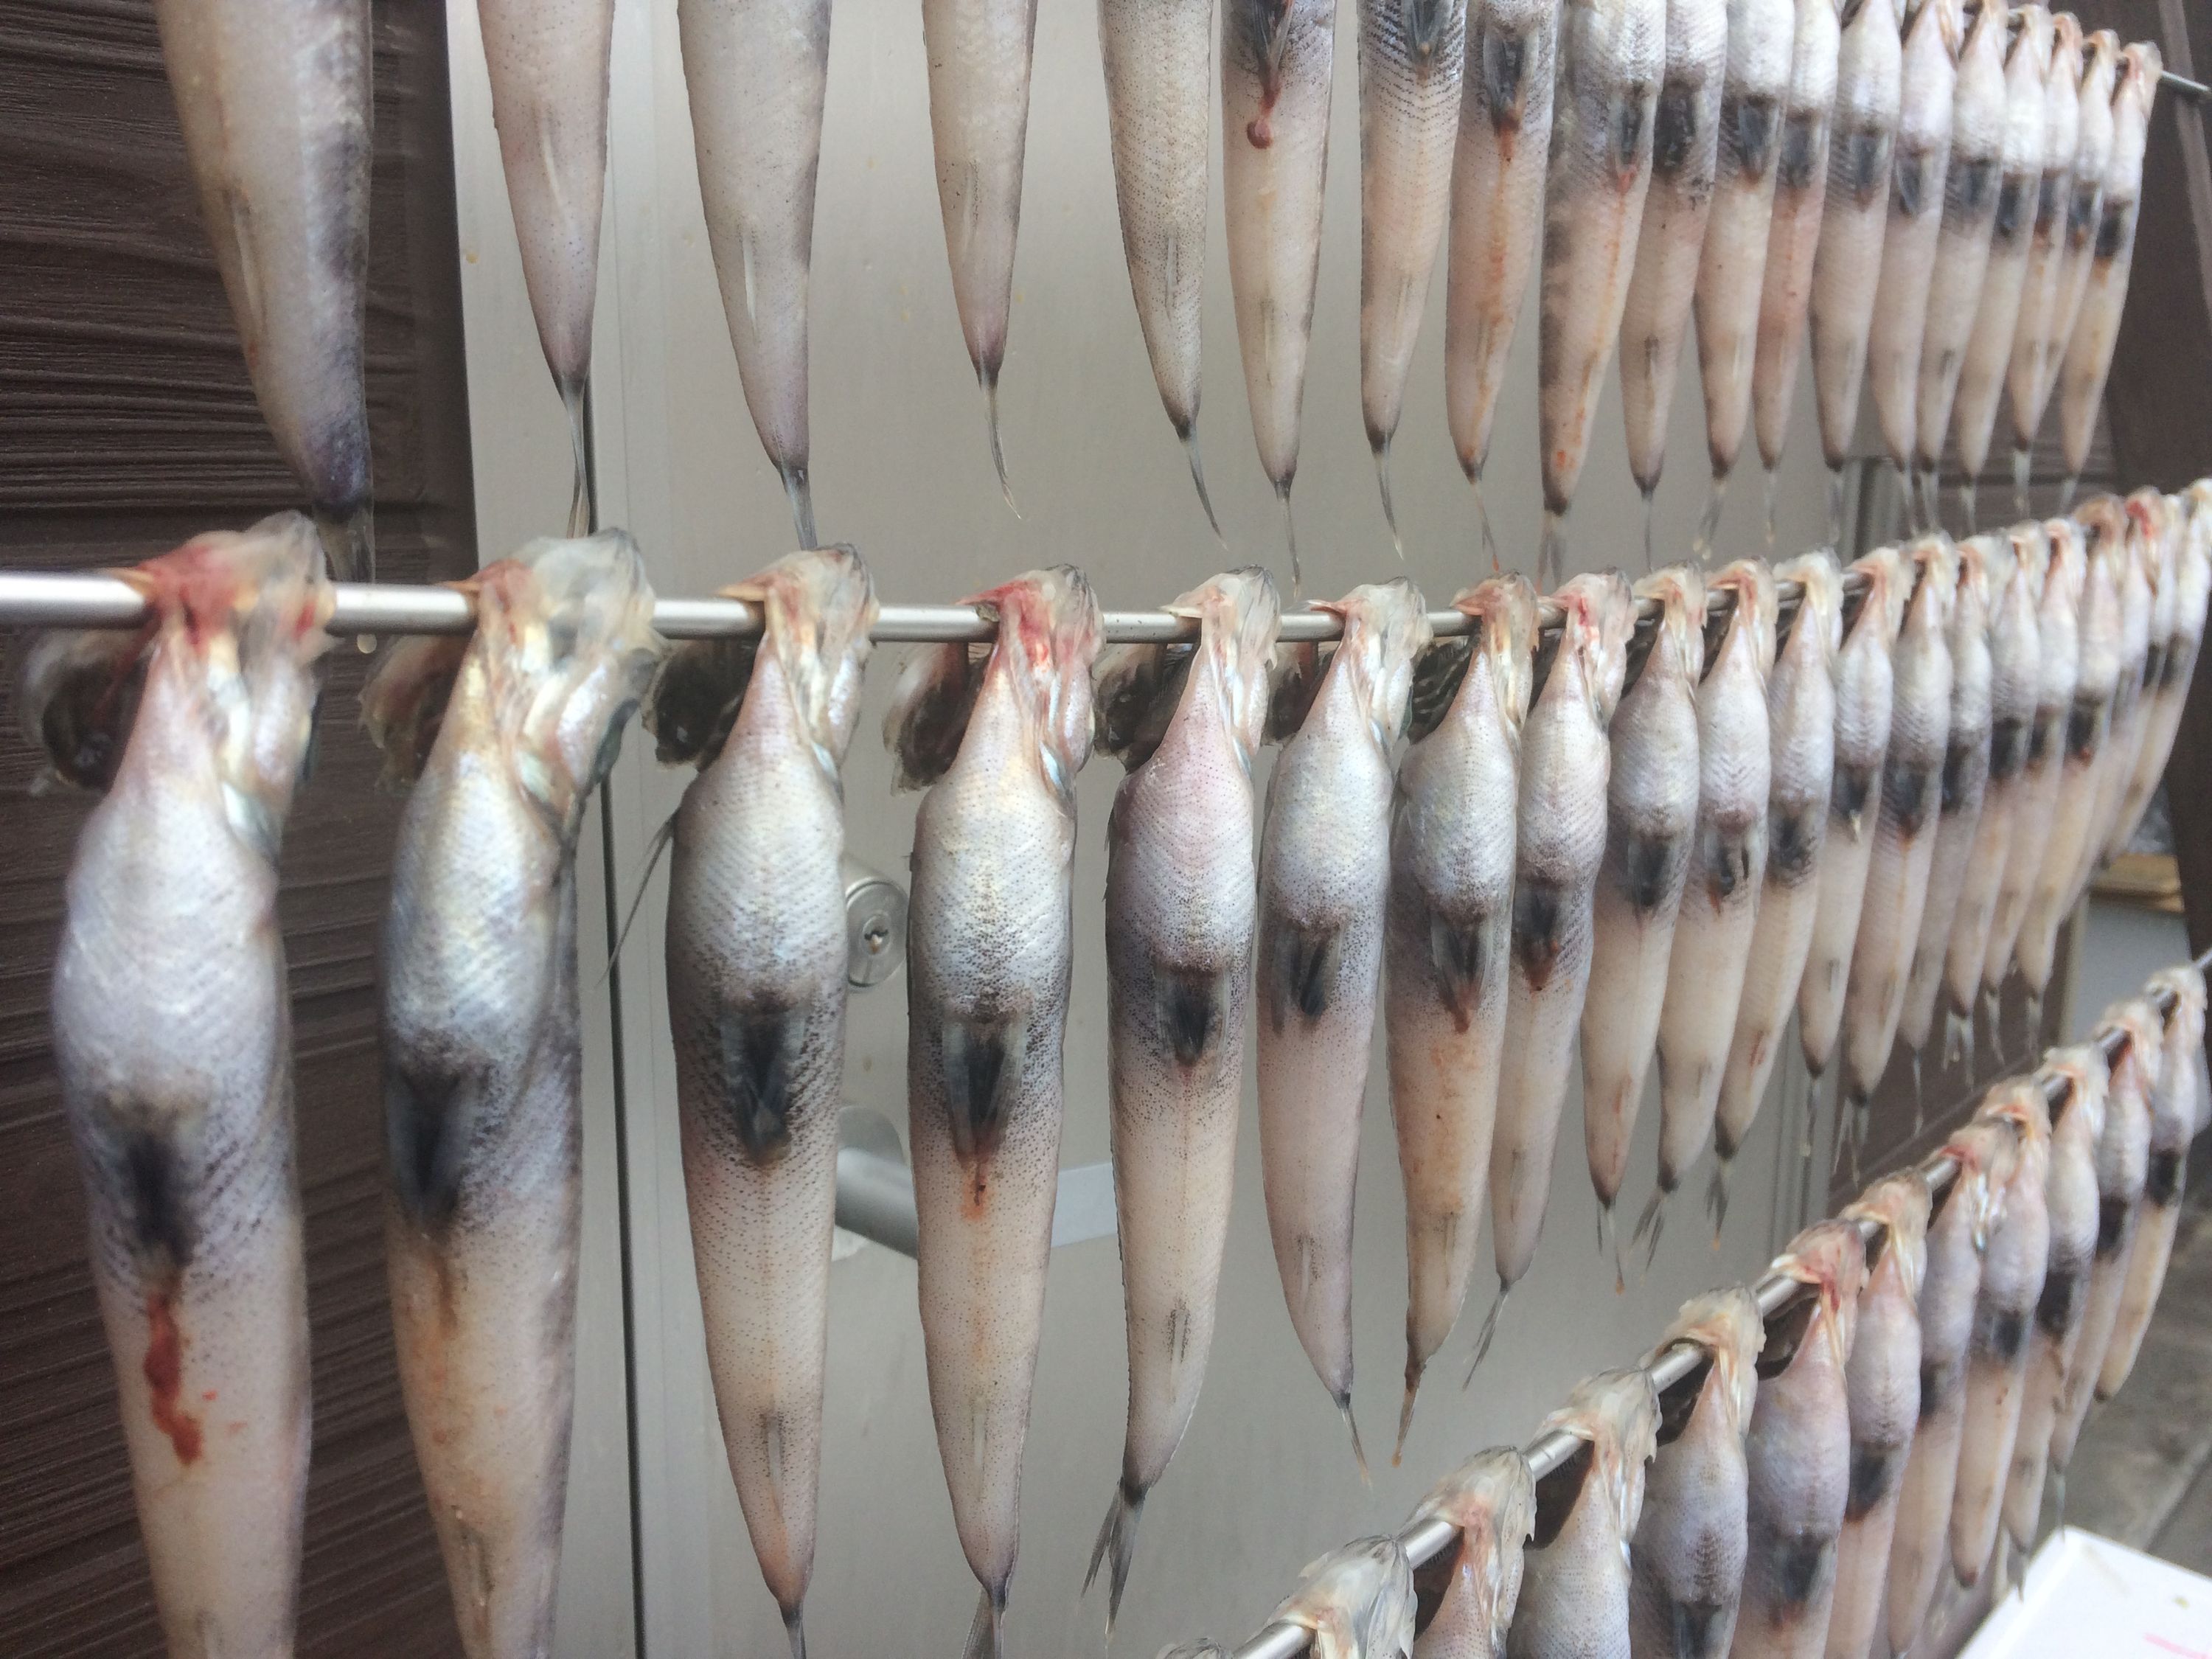 A line of fish drying on a rack across a door.